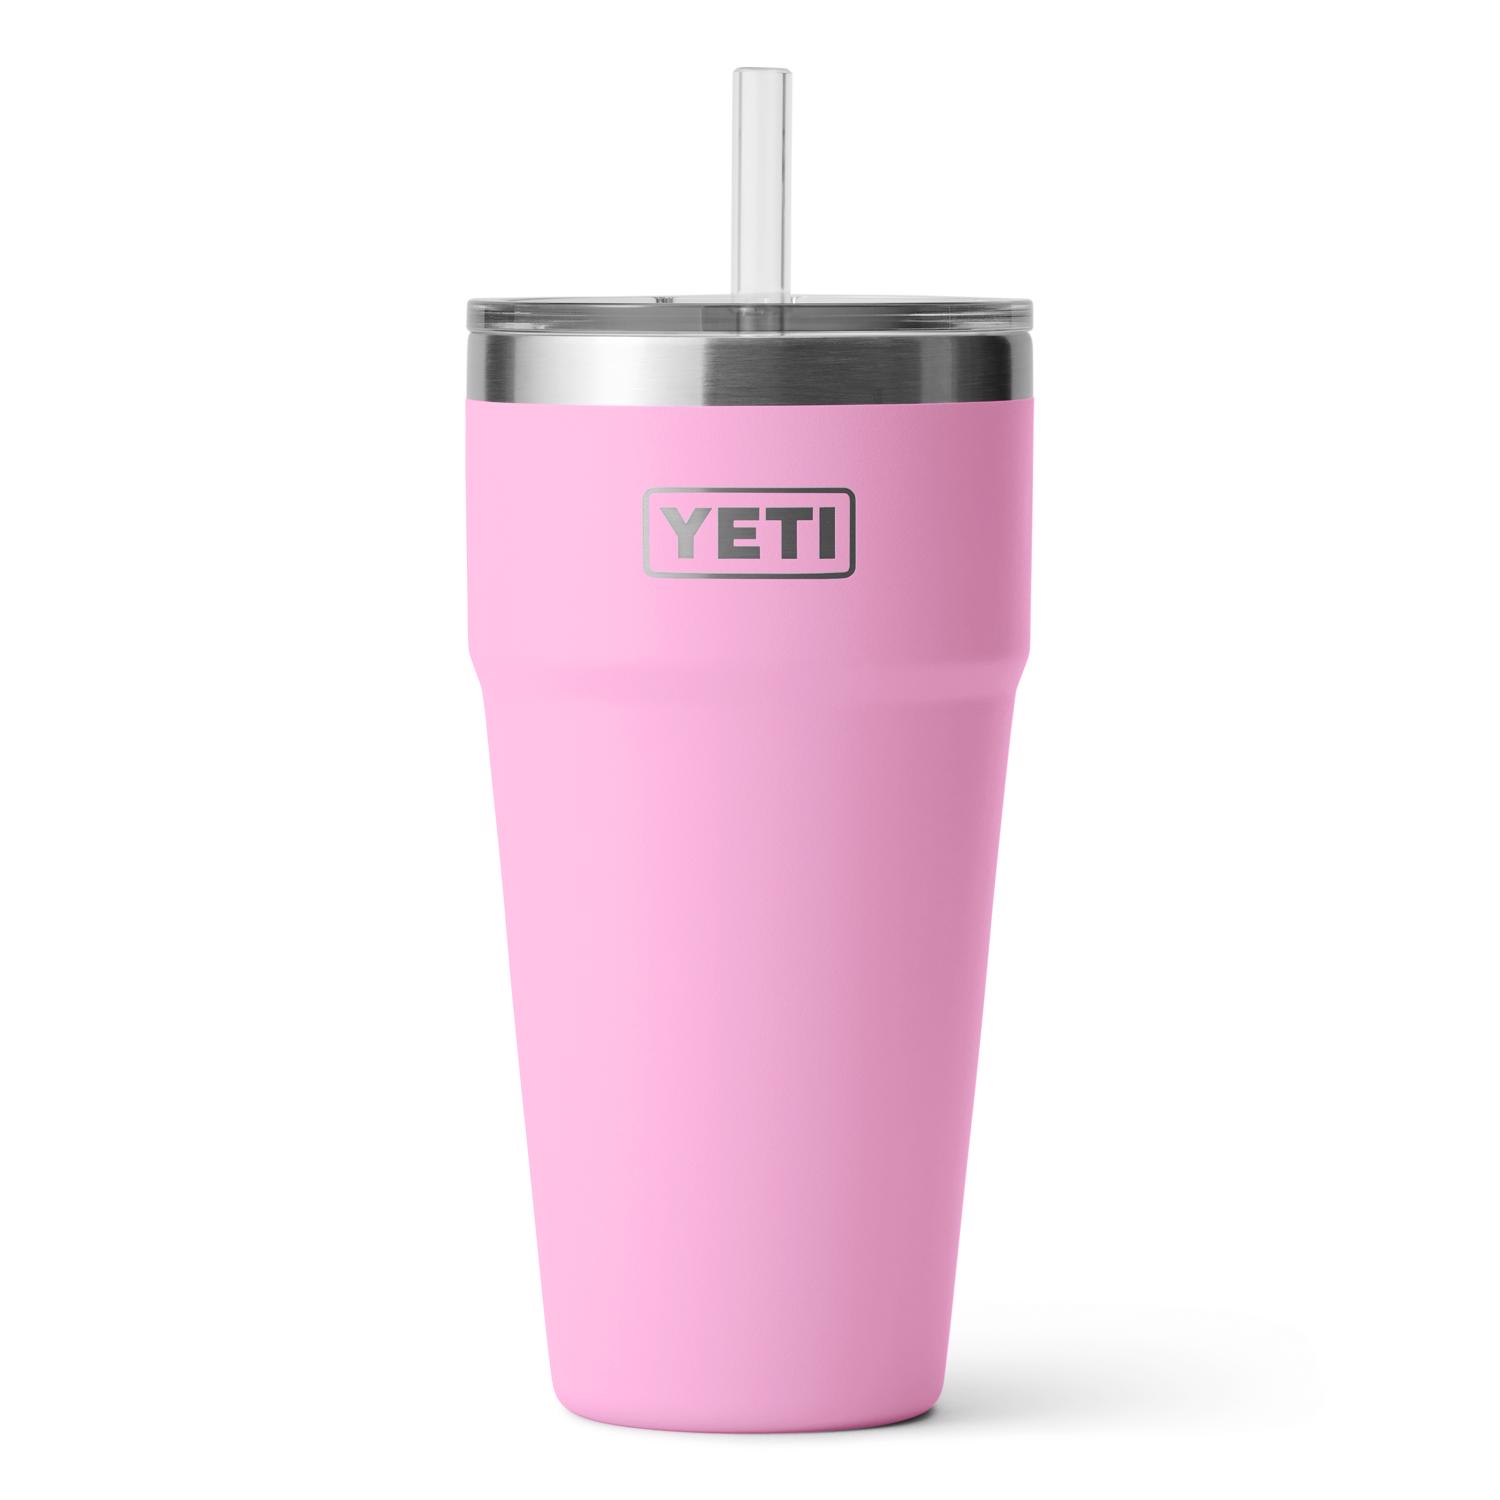 Stanley 1913 30 Oz Insulated The Iceflow Flip Straw Tumbler Rose Quartz  10-09993-166 from Stanley 1913 - Acme Tools